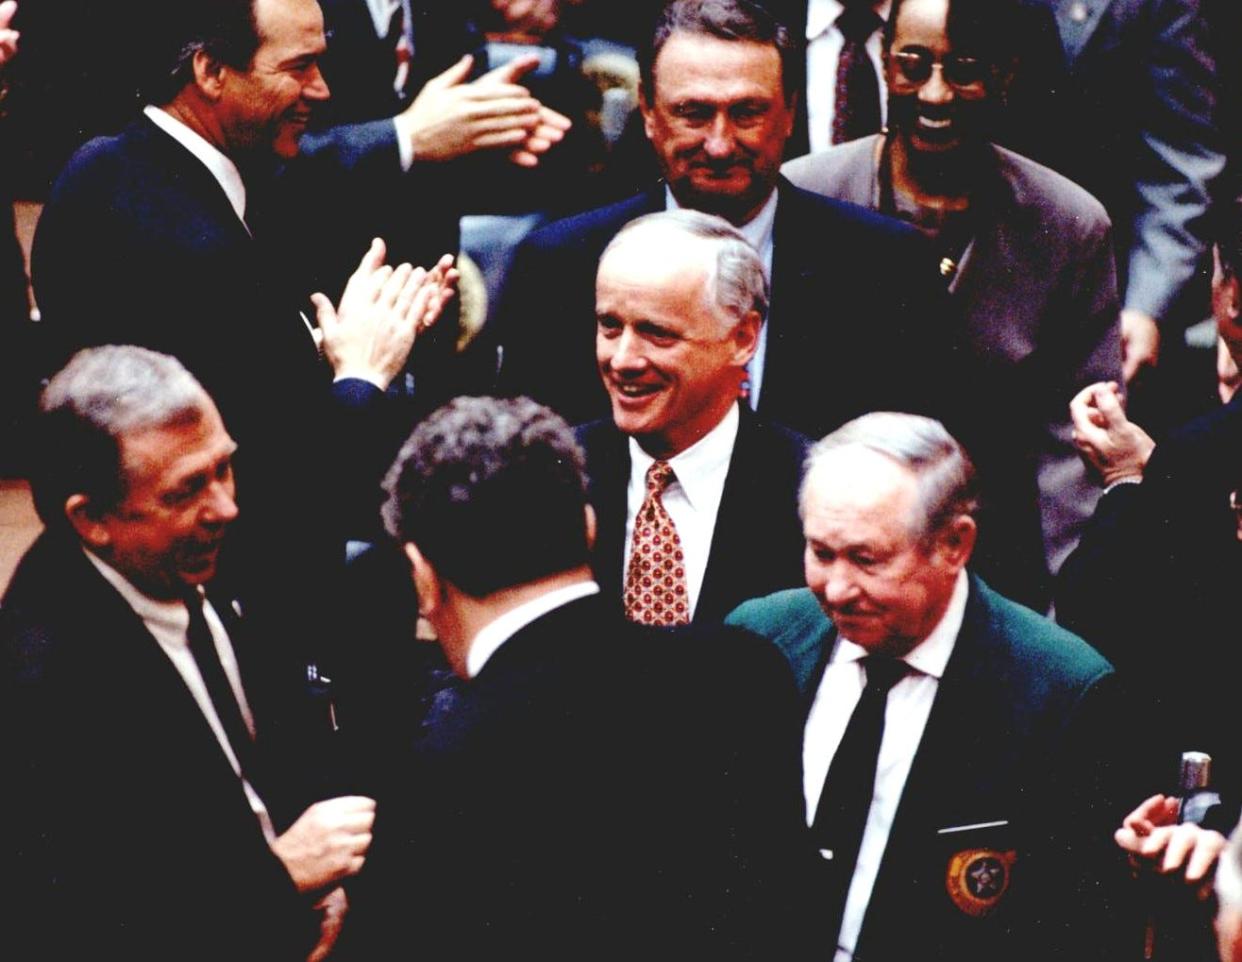 Gov. Frank Keating is greeted by legislators in 1995 in the House chamber at the Capitol as he makes his way to the podium to deliver his State of the State Address.